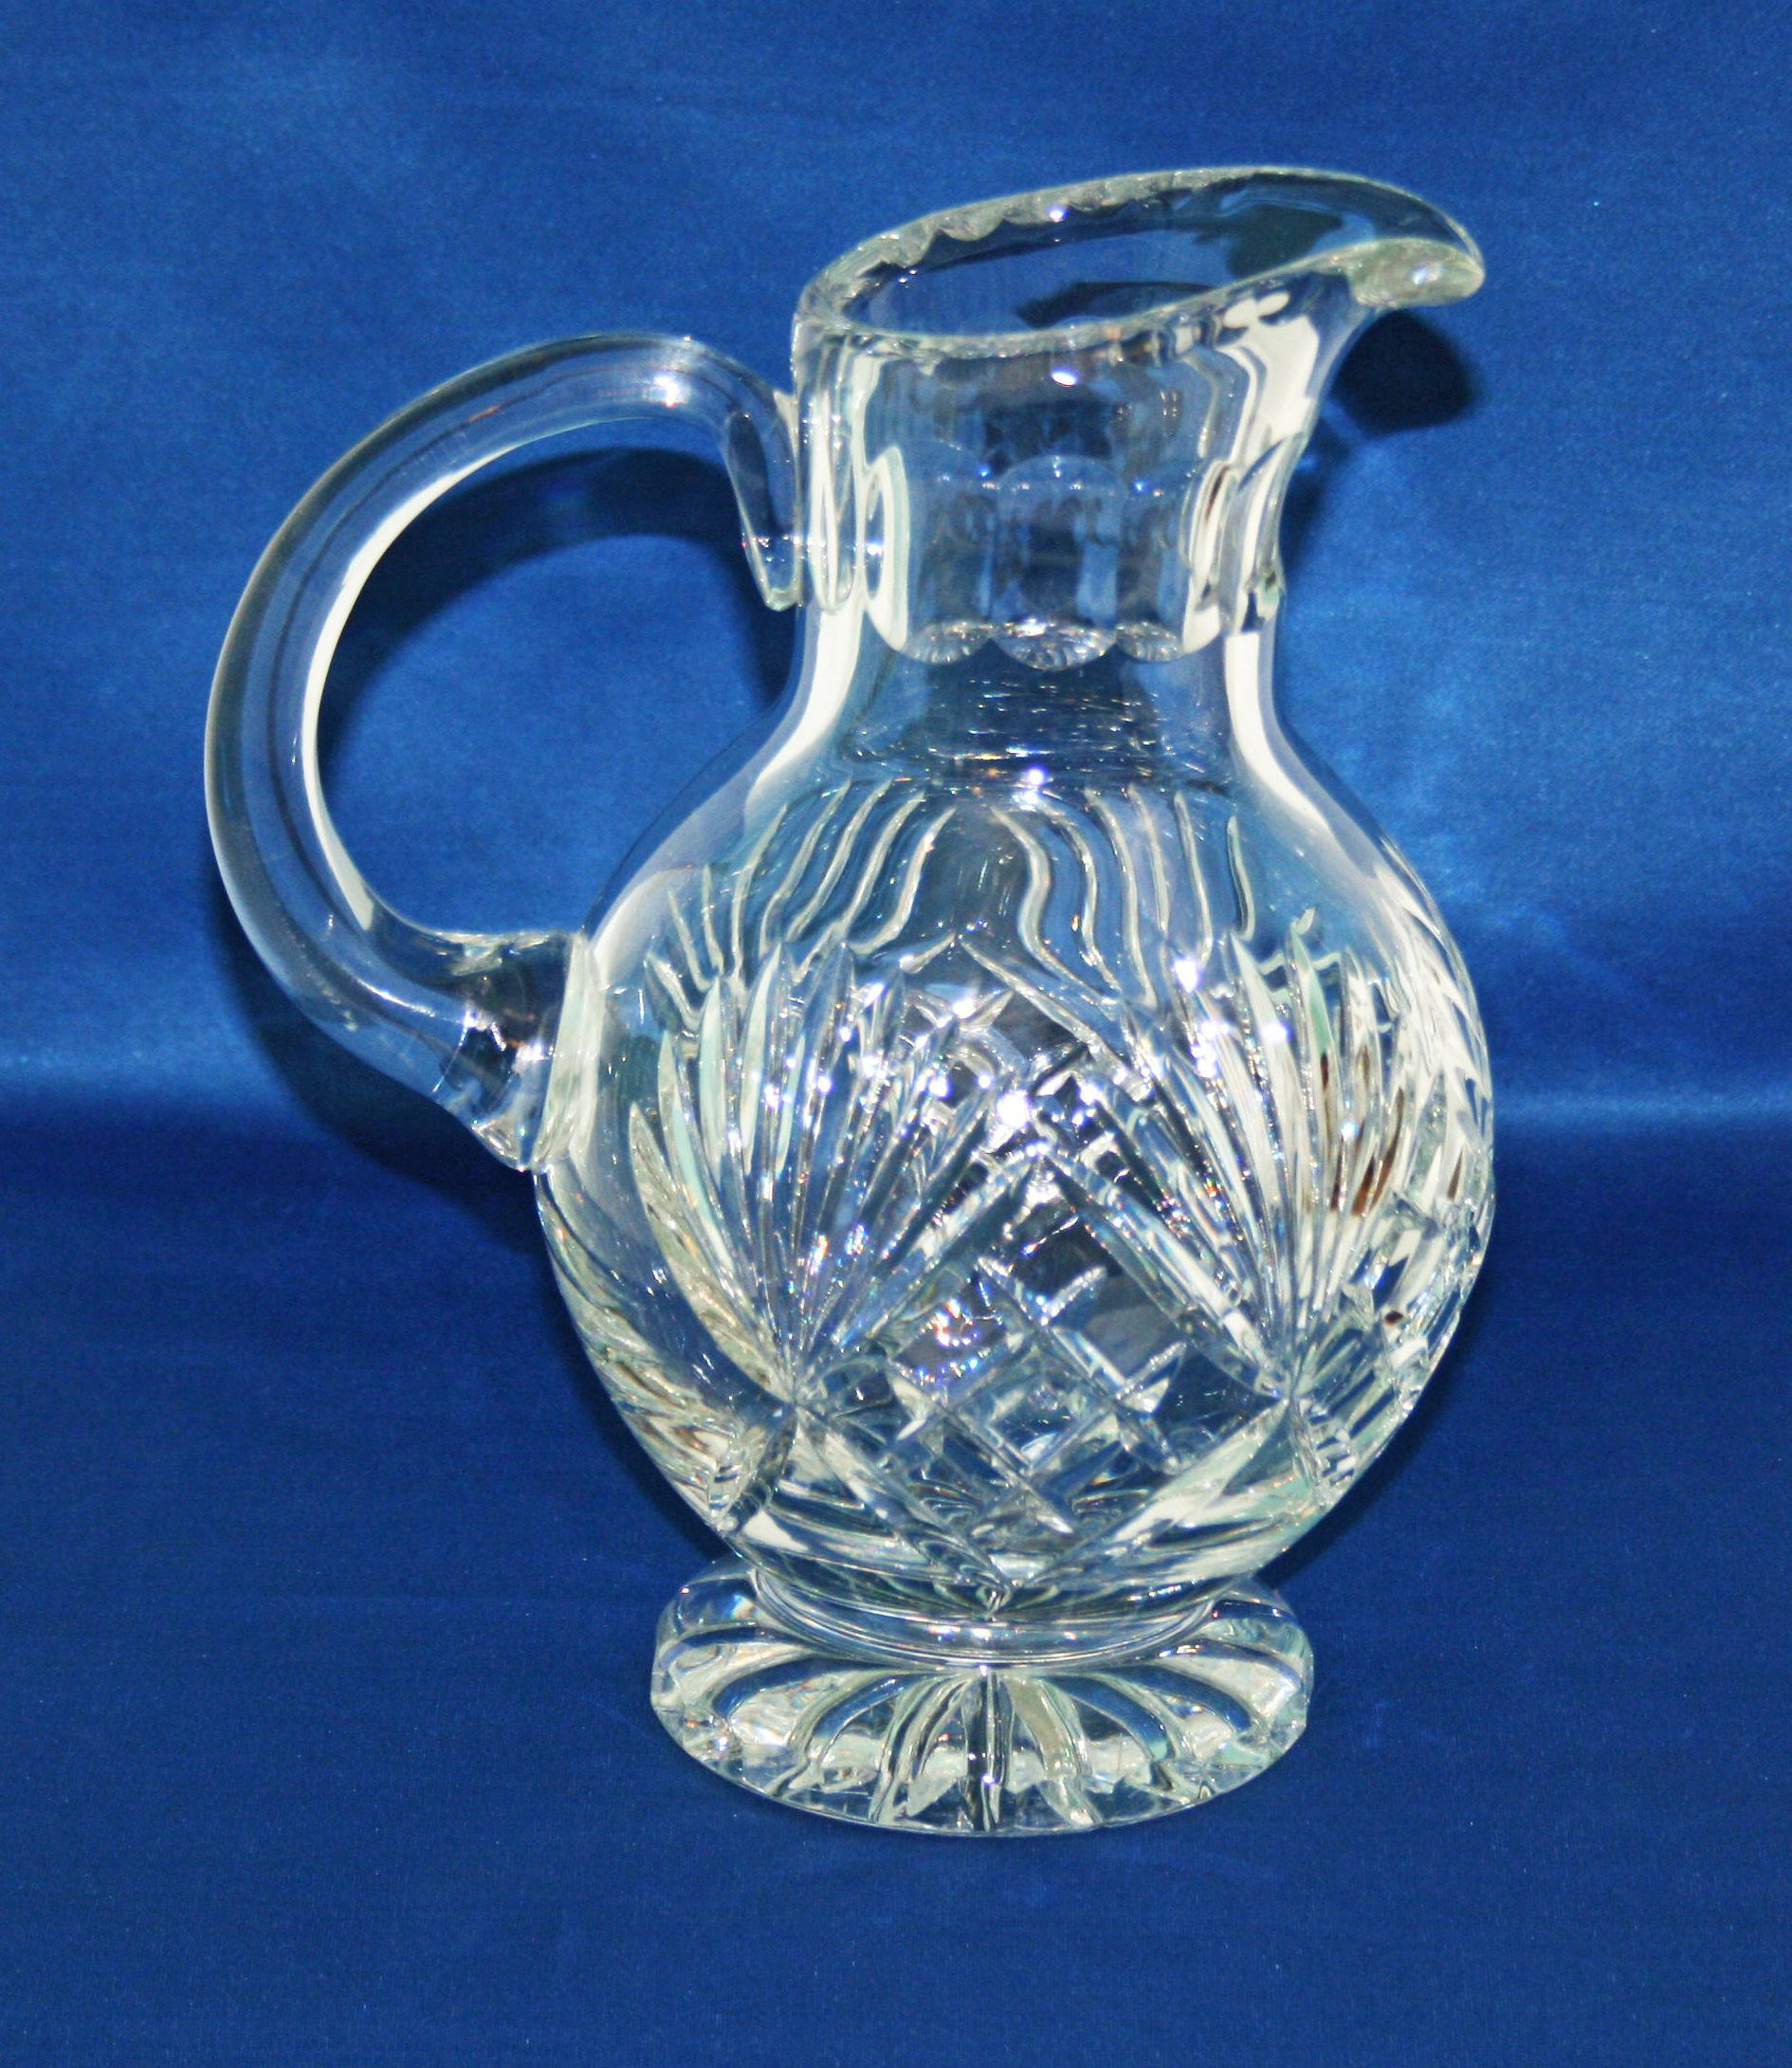 27 Stylish Polonia Lead Crystal Vase 2024 free download polonia lead crystal vase of vintage polonia crystal ball pitcher made in poland heavy 24 lead intended for vintage polonia crystal ball pitcher made in poland heavy 24 lead crystal footed b